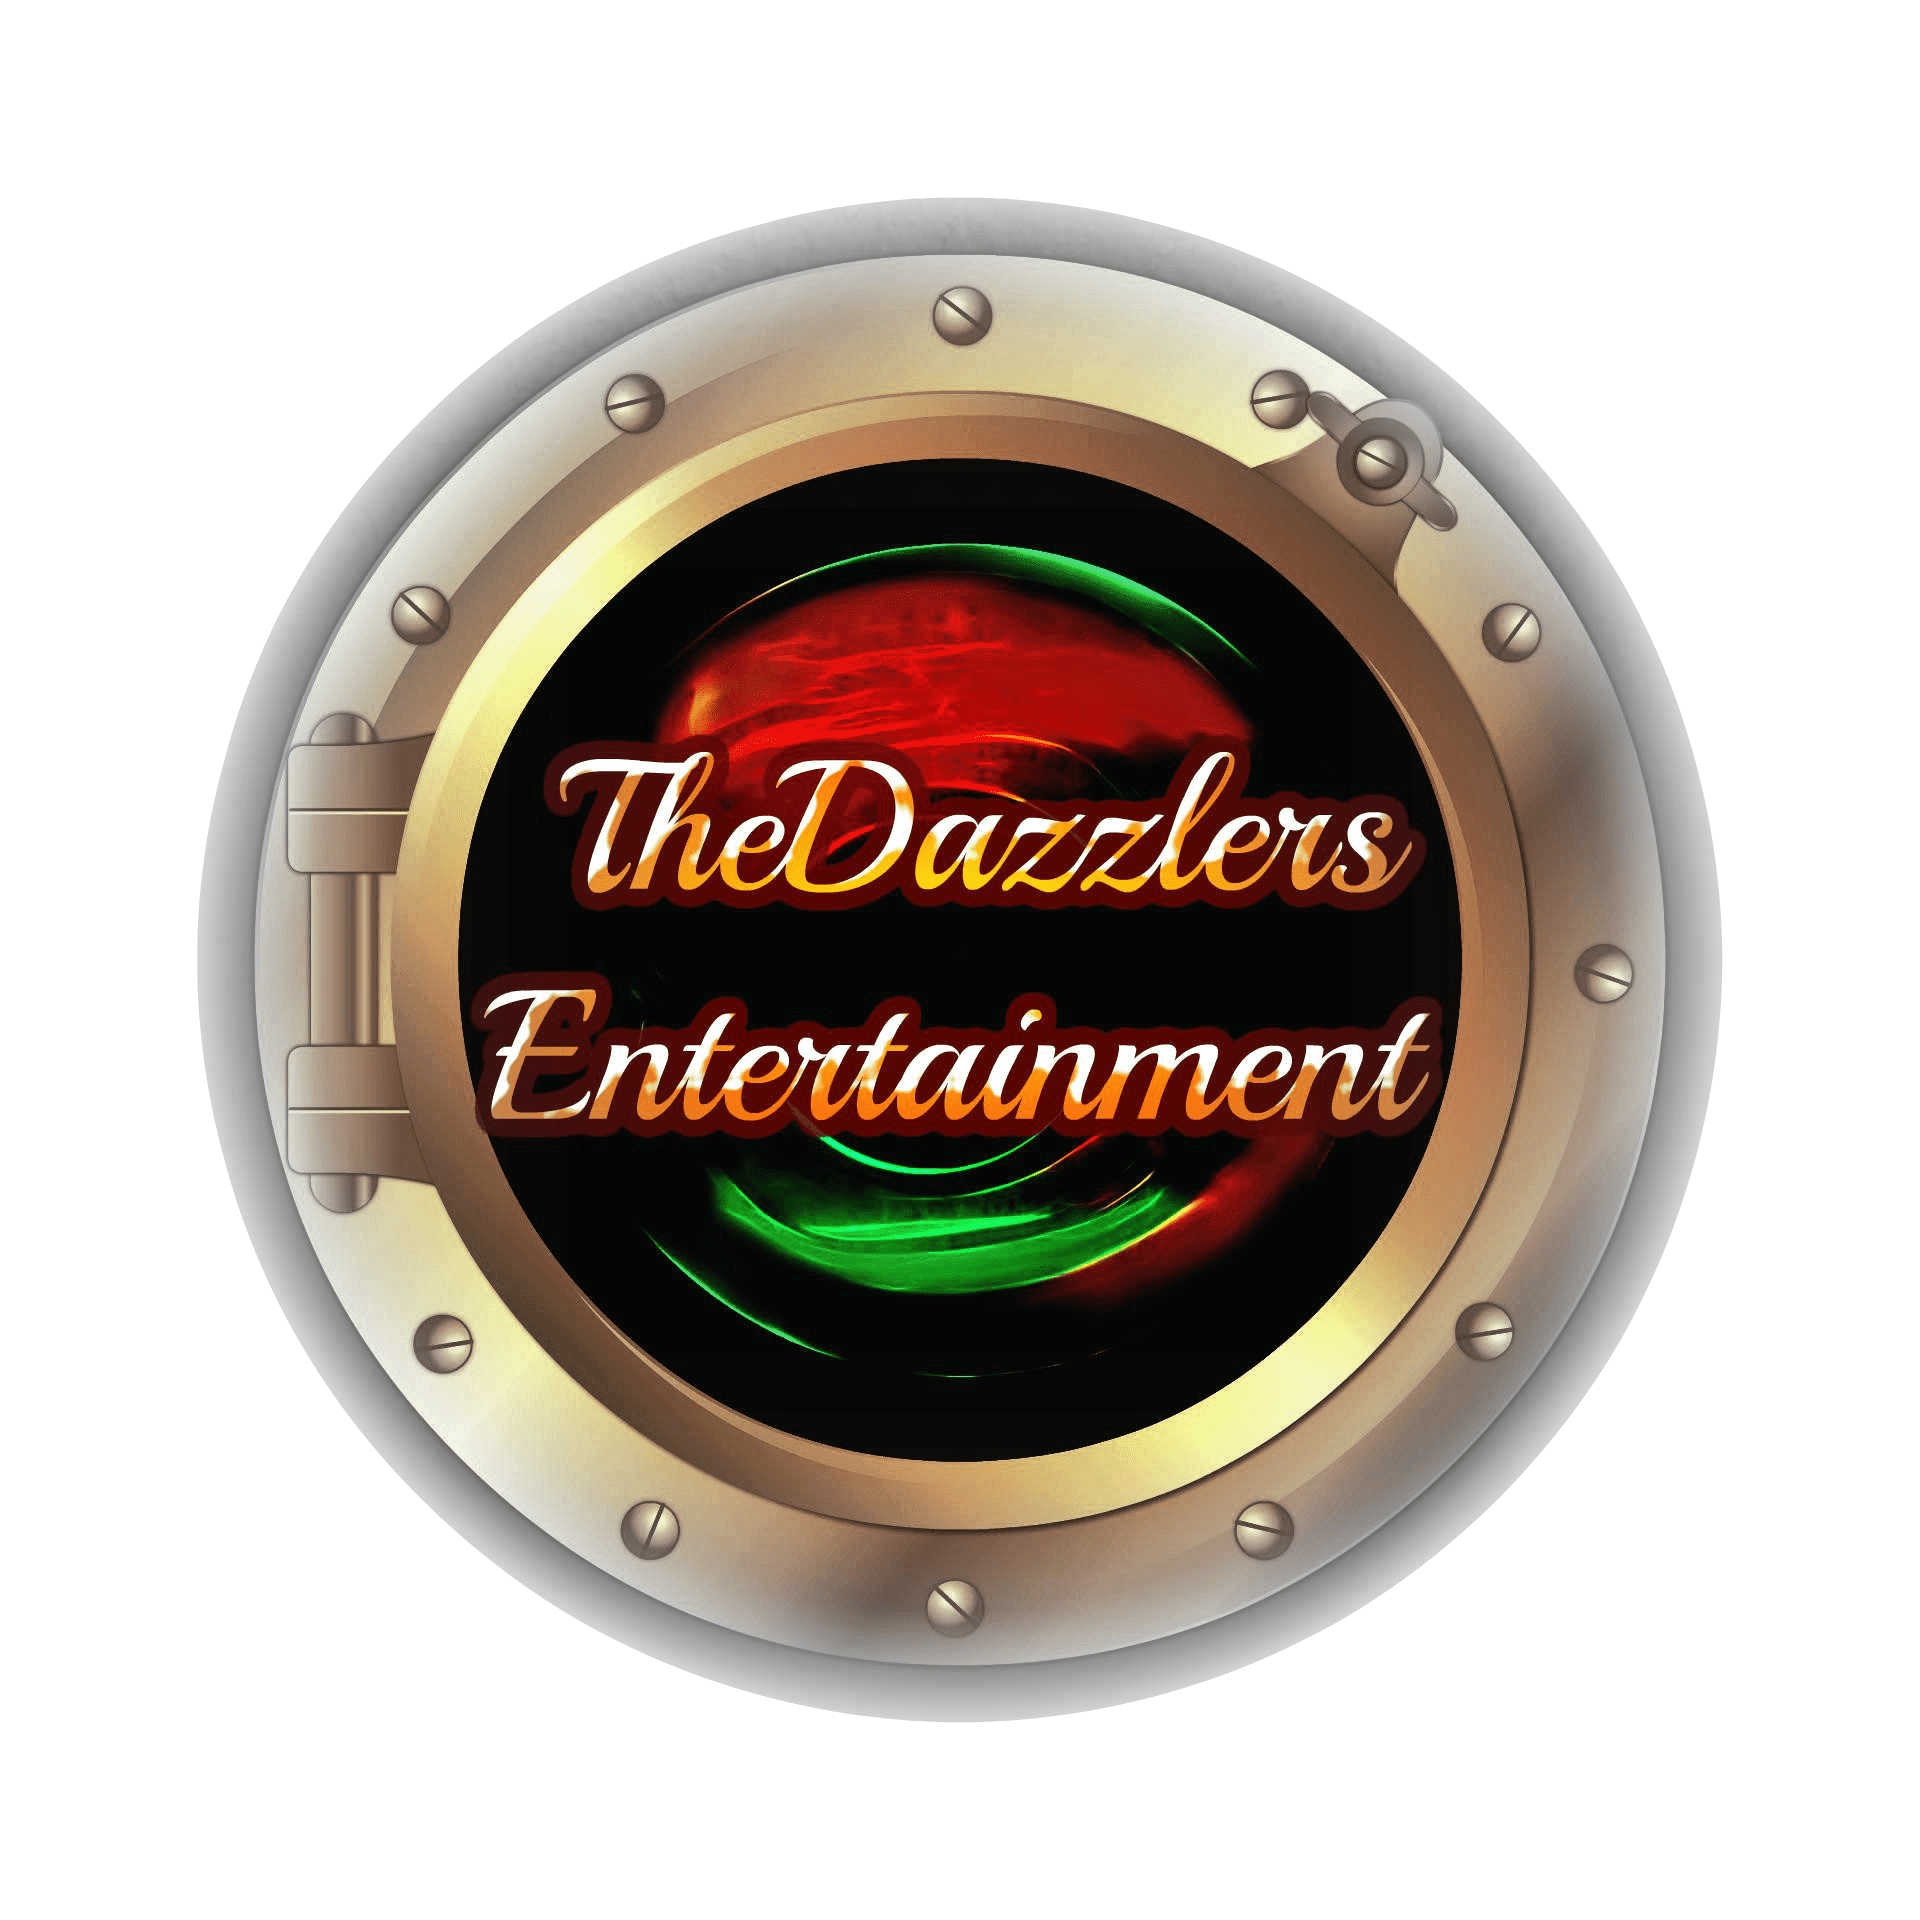 TheDazzlers Entertainment